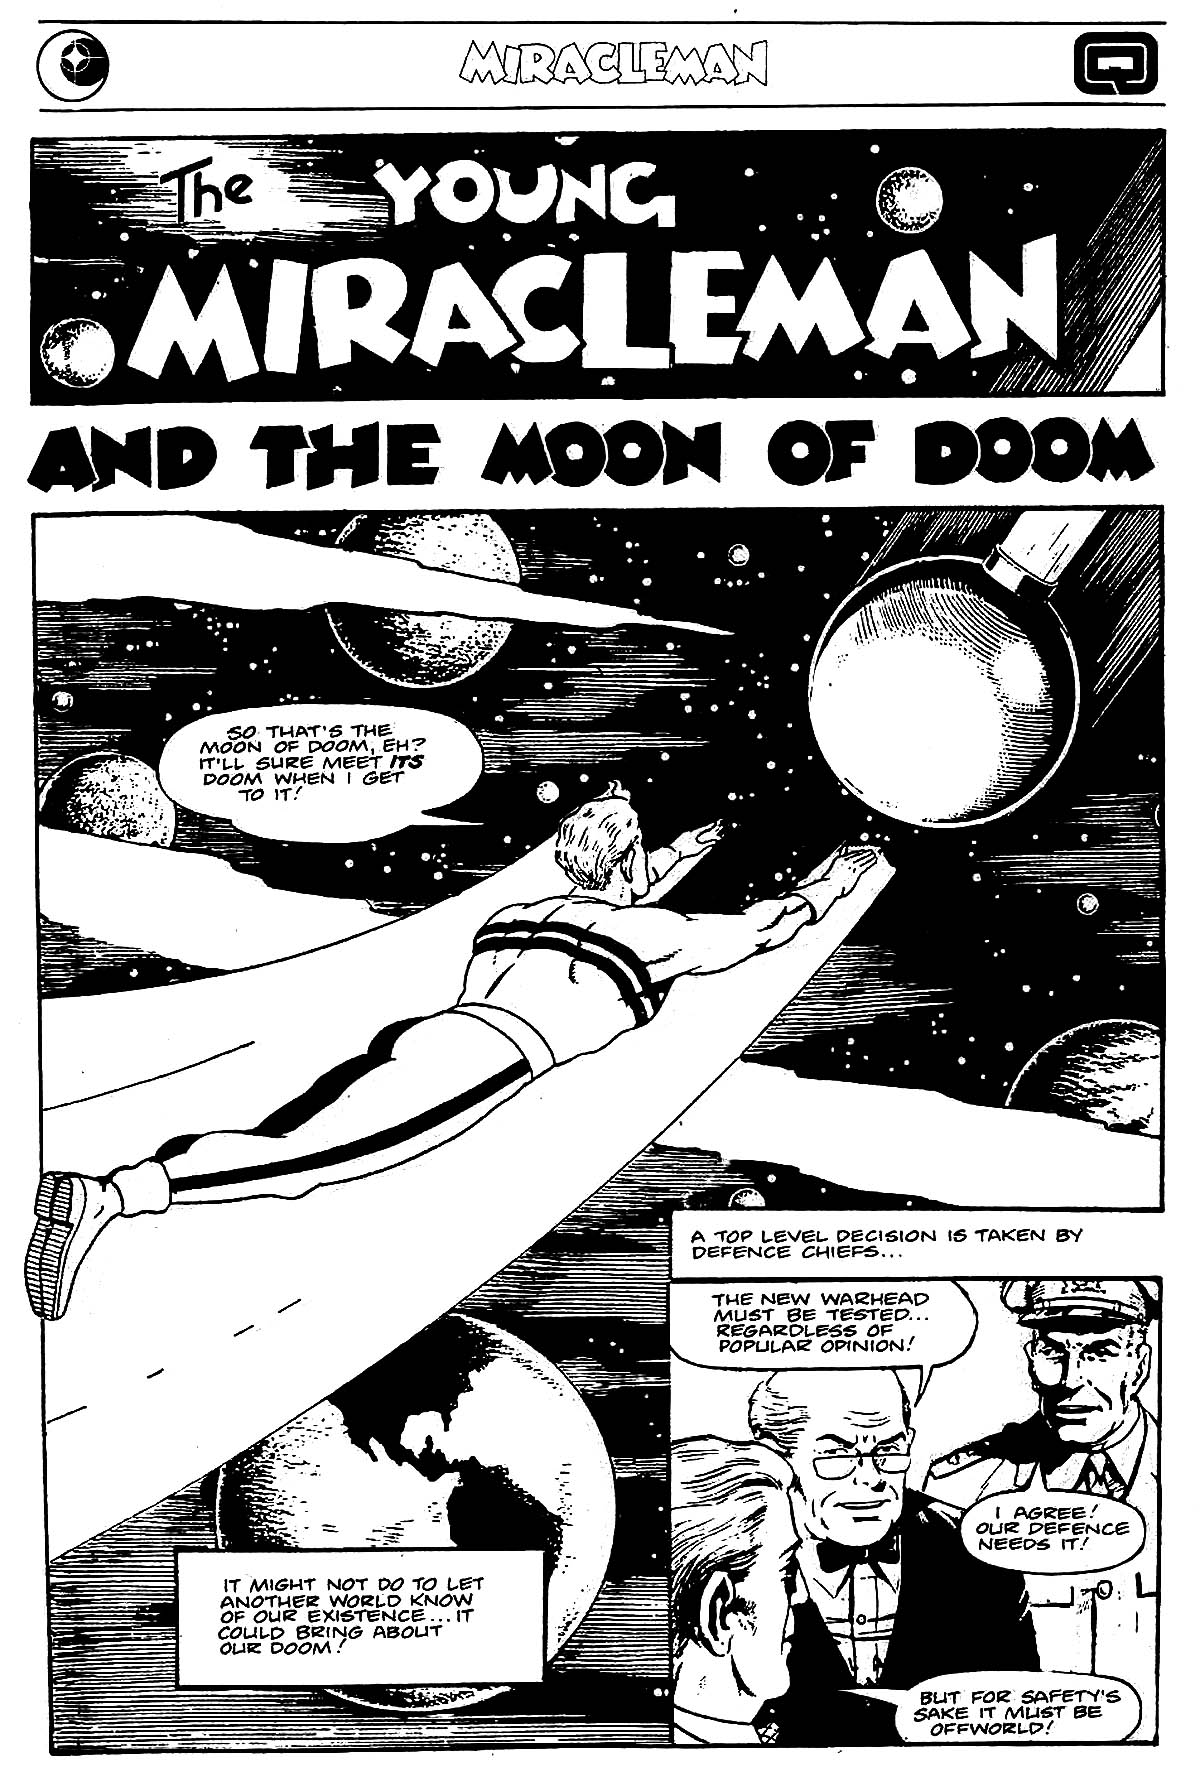 Read online Miracleman 3-D comic -  Issue # Full - 28